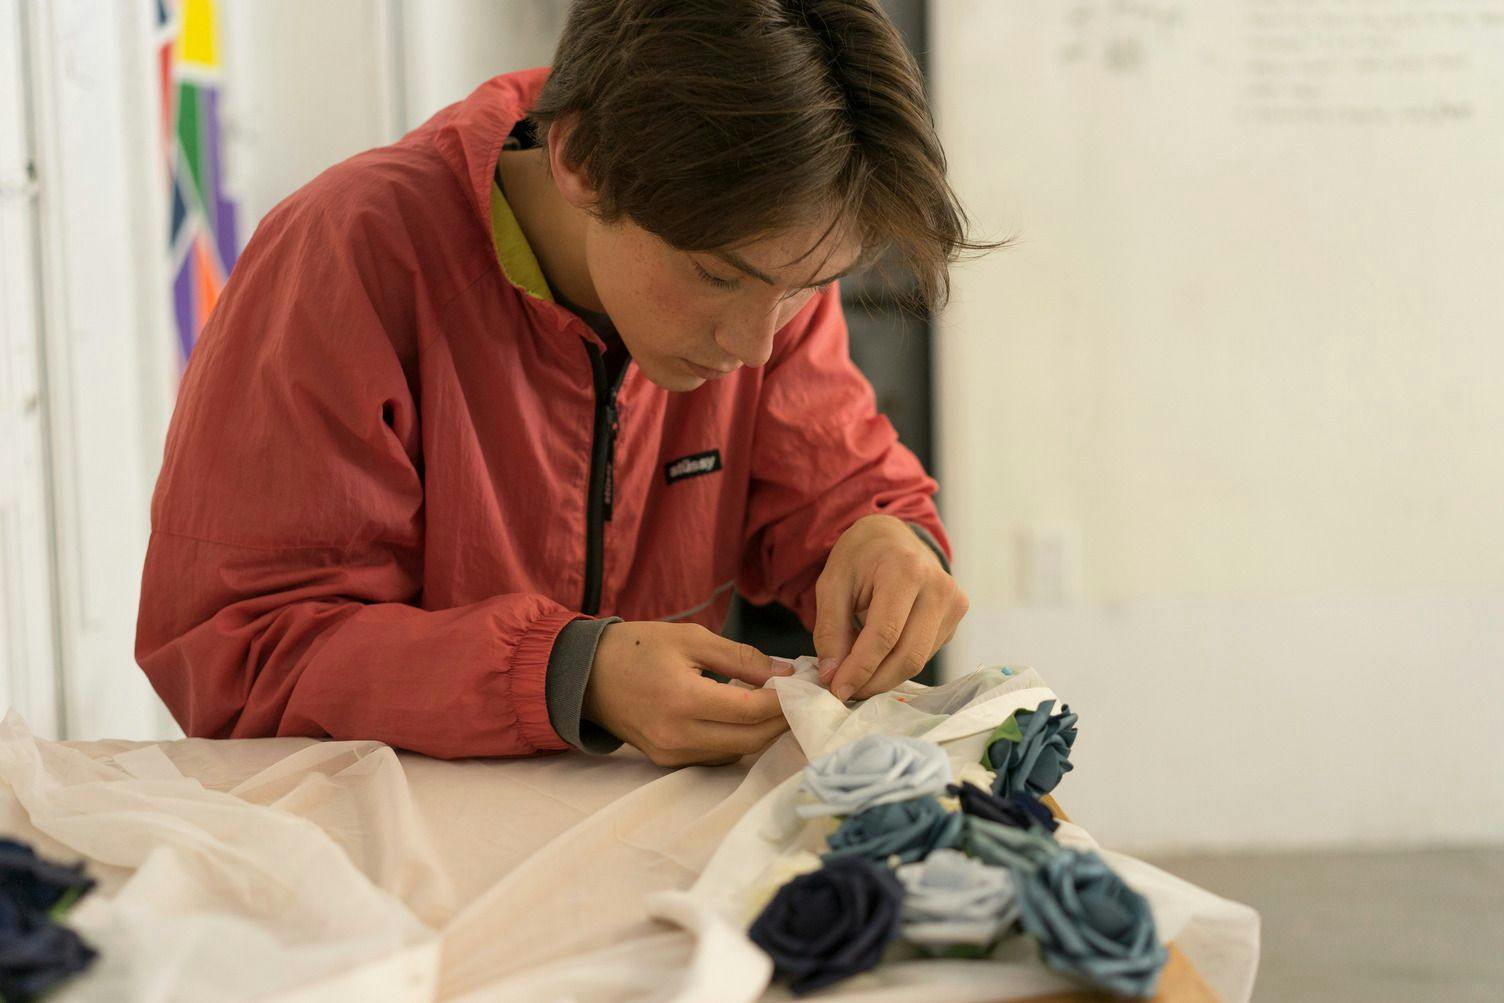 ati san francisco student working with fabric making roses